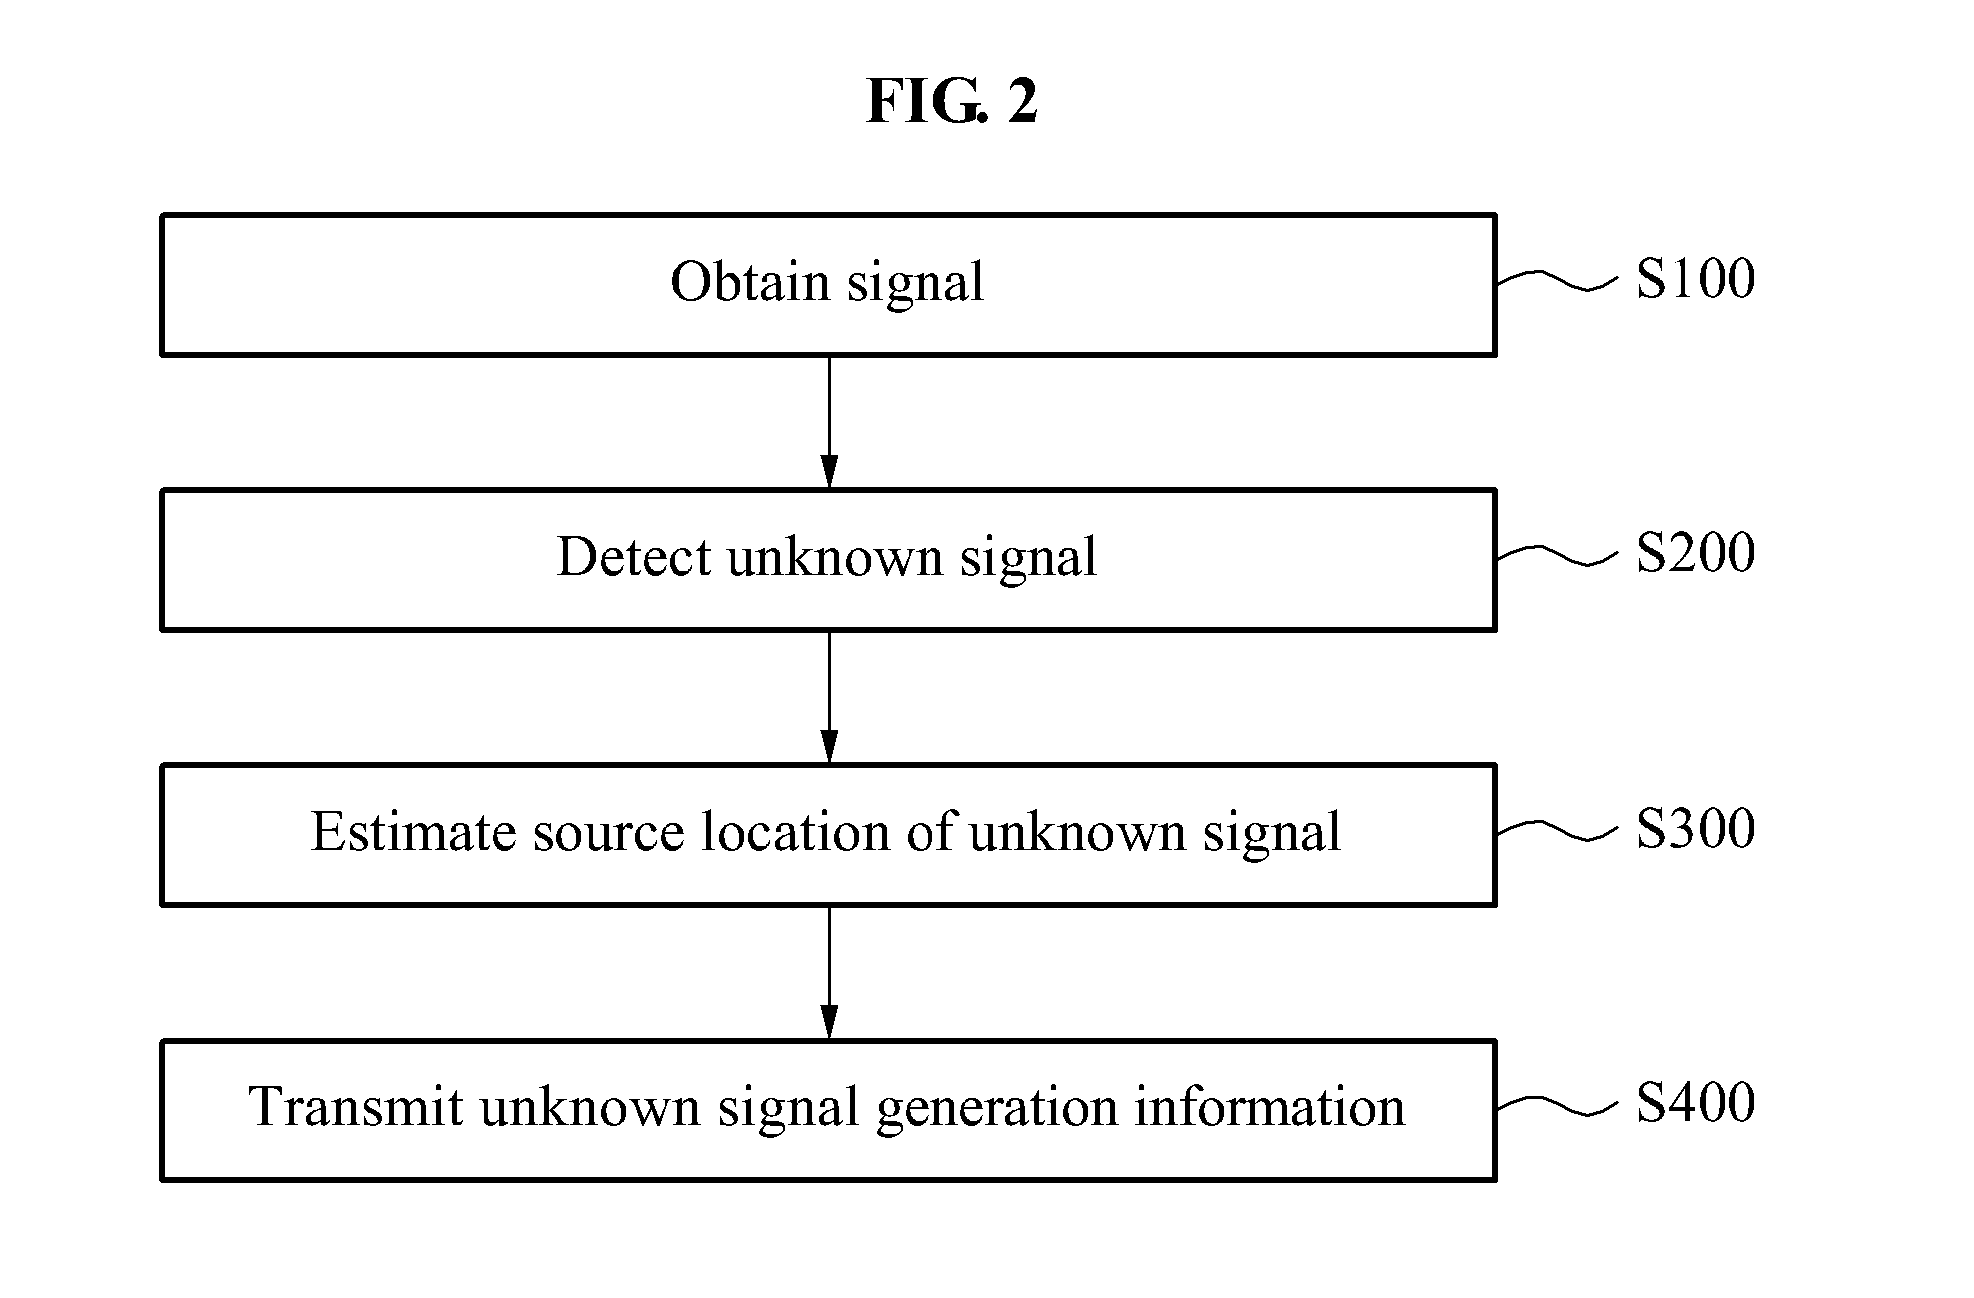 Detecting and localization method of unknown signal using aircraft with ads-b system